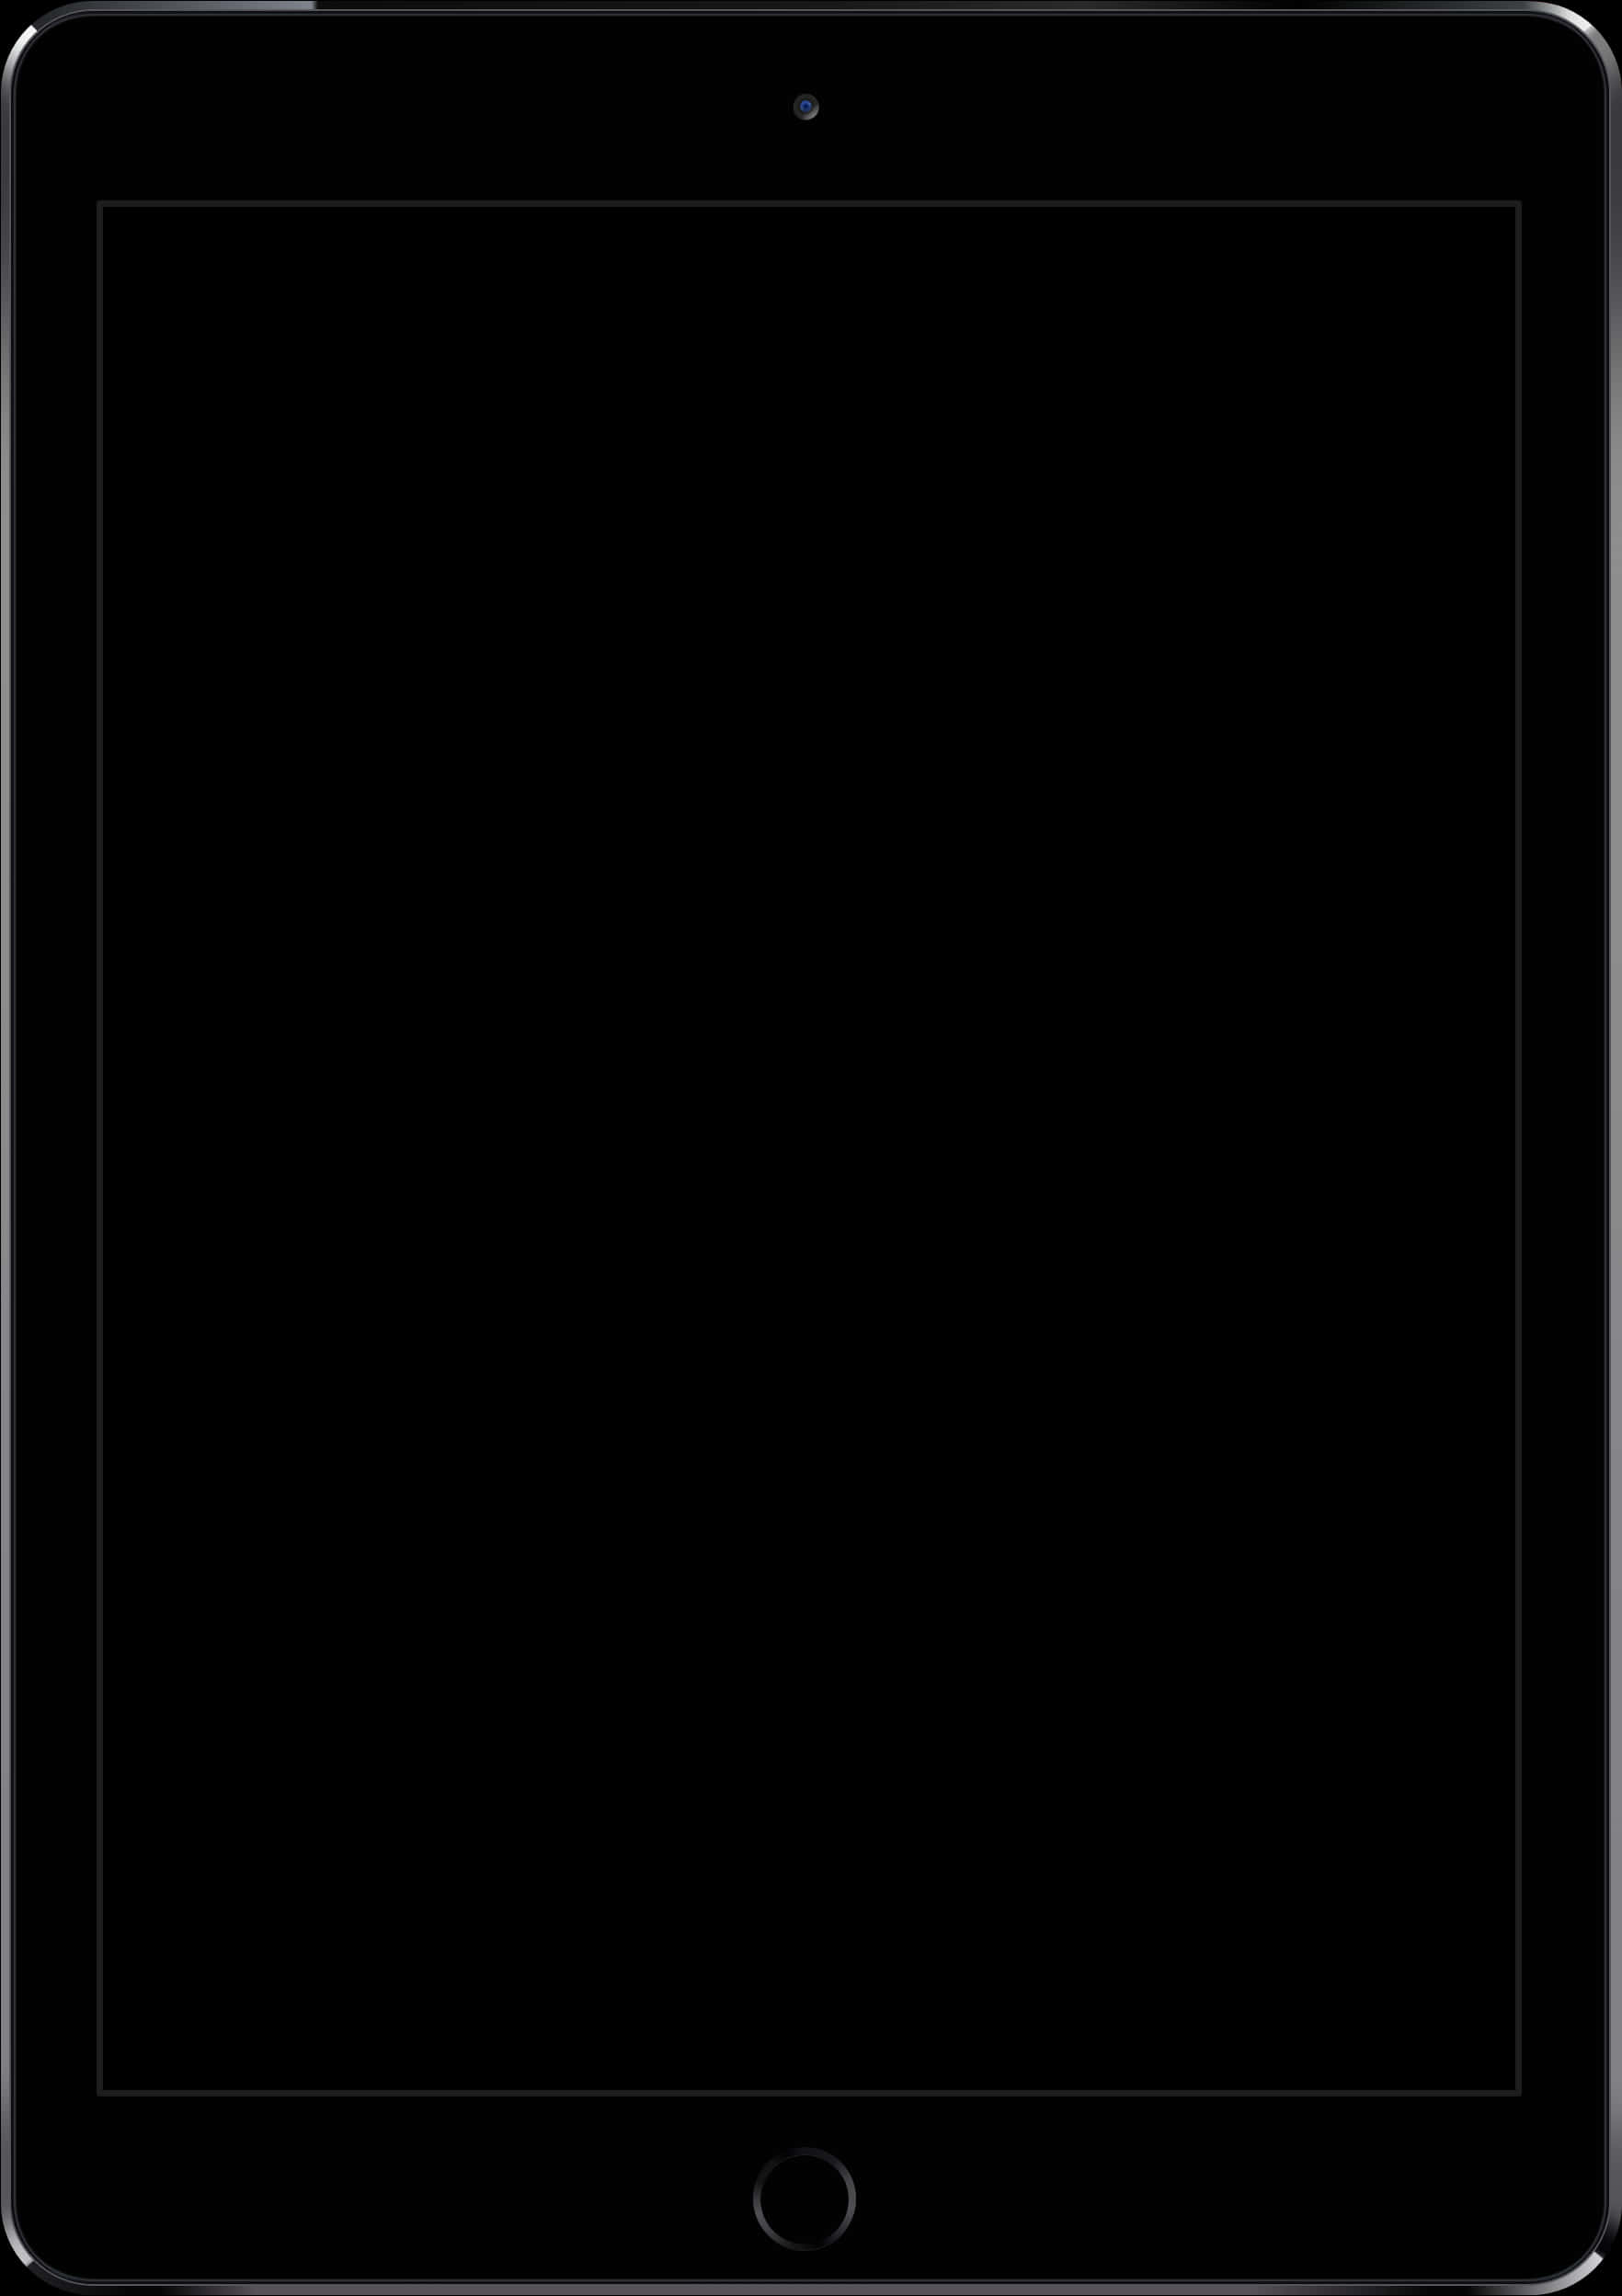 A Black Tablet With A Black Screen